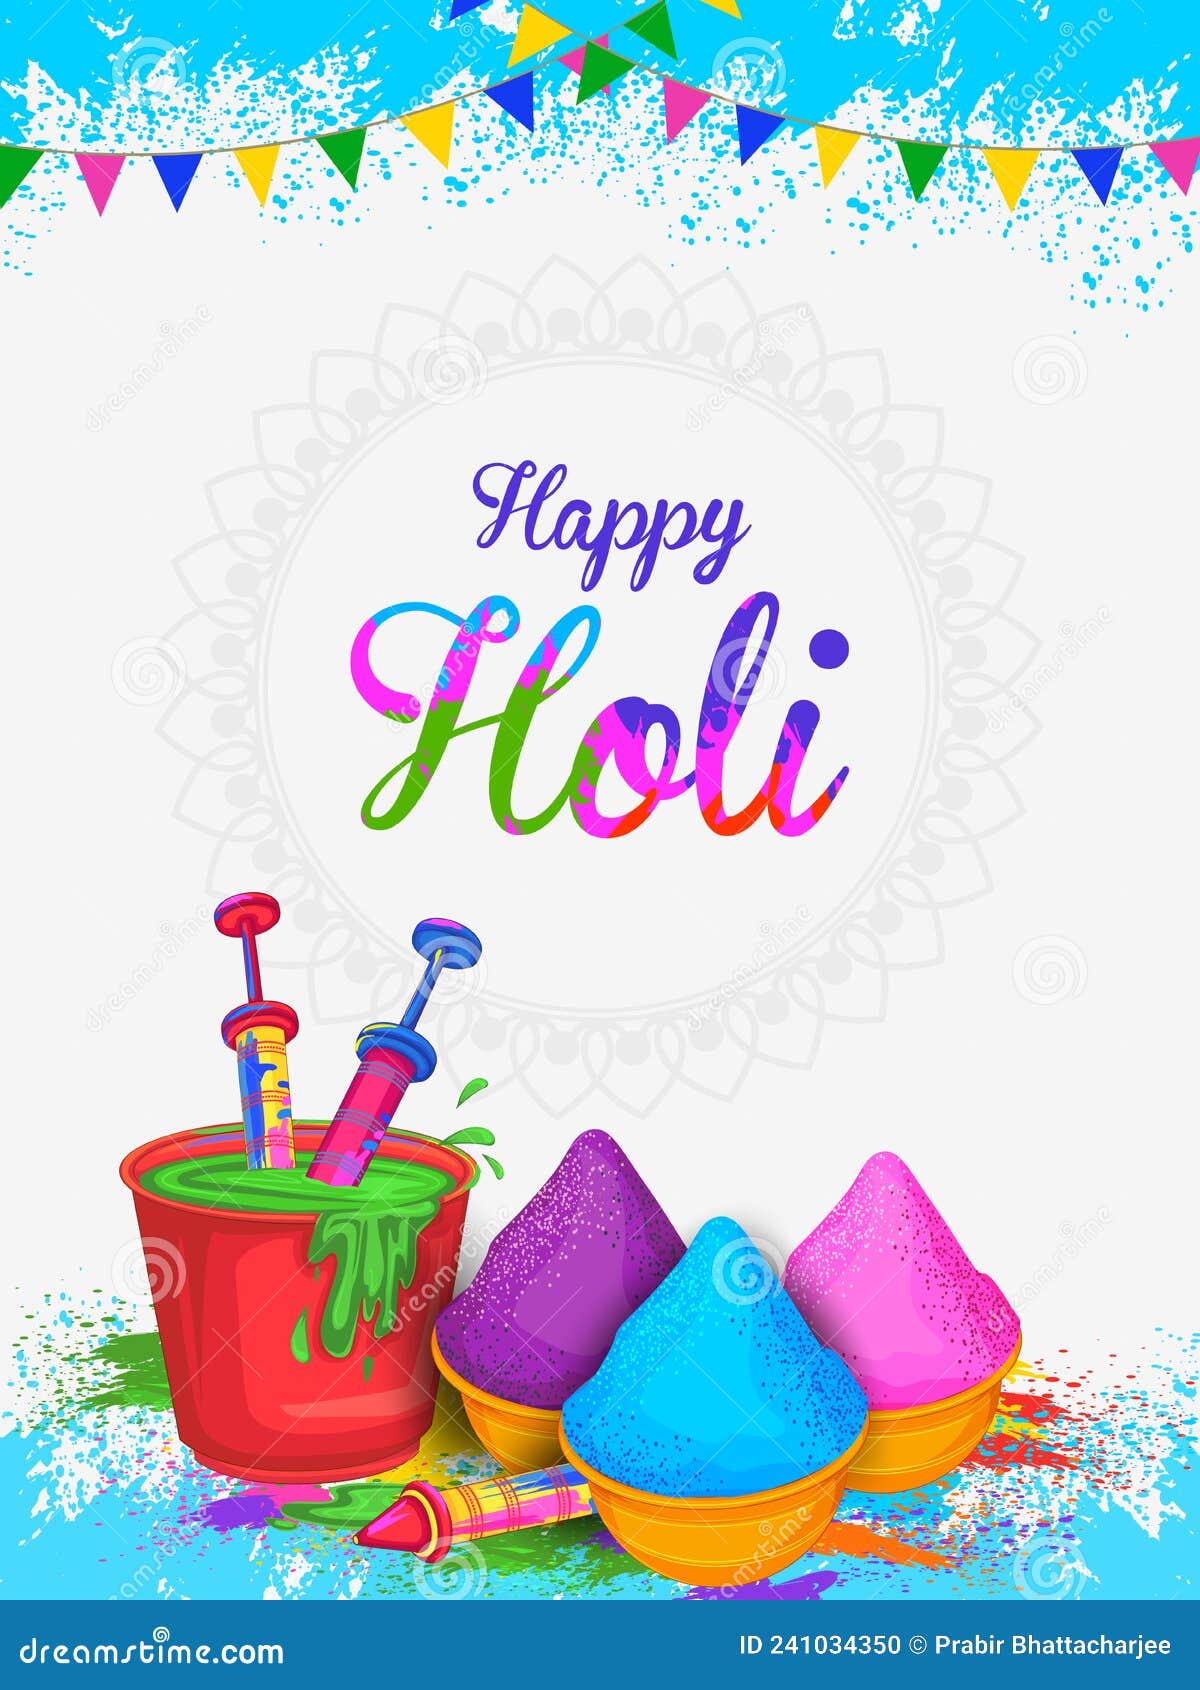 Write a Name On Holi Wallpaper With My Photo